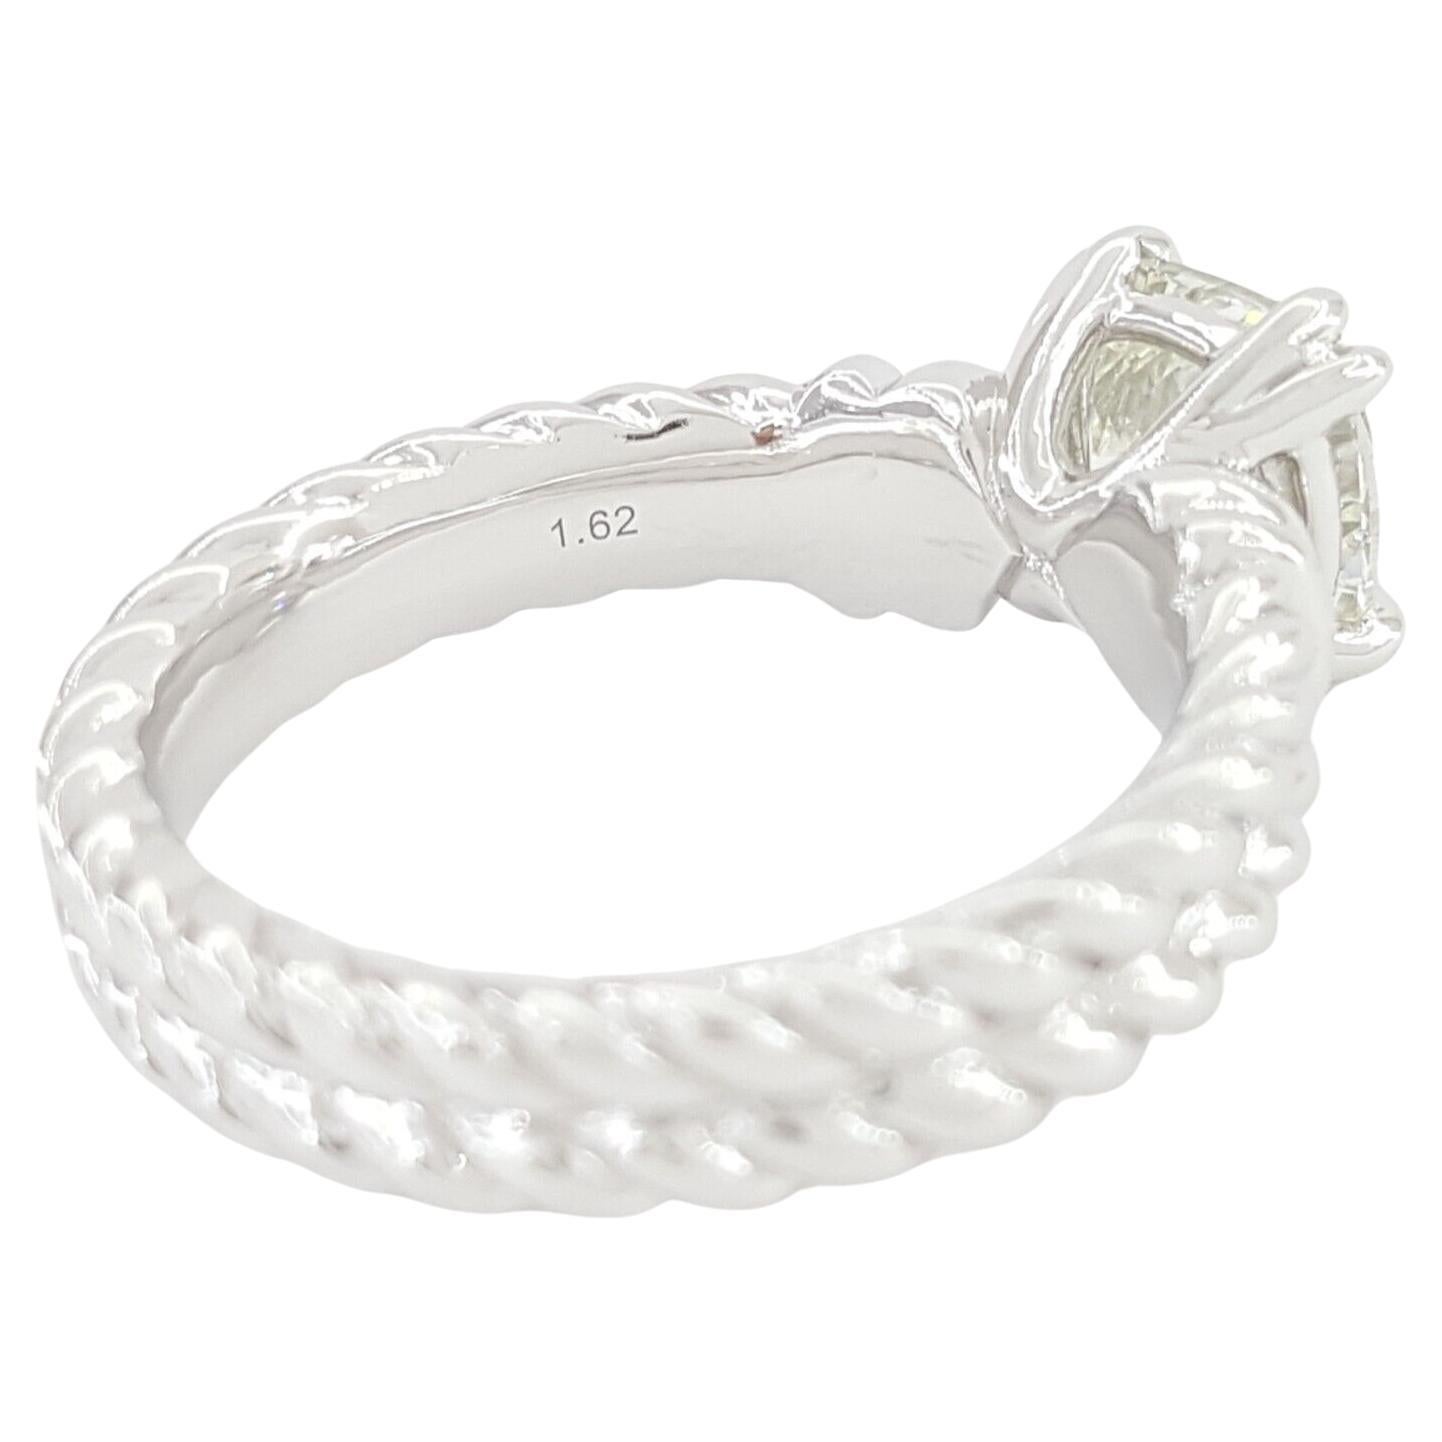 David Yurman 1.62 ct Signature Cushion Brilliant Cut Diamond Rope Platinum Engagement Ring.



The ring weighs 10.2 grams, size 6, the center is a DY Signature Natural 1.62 Cushion Brilliant Cut Diamond, I in color, SI1 in clarity, Triple Excellent